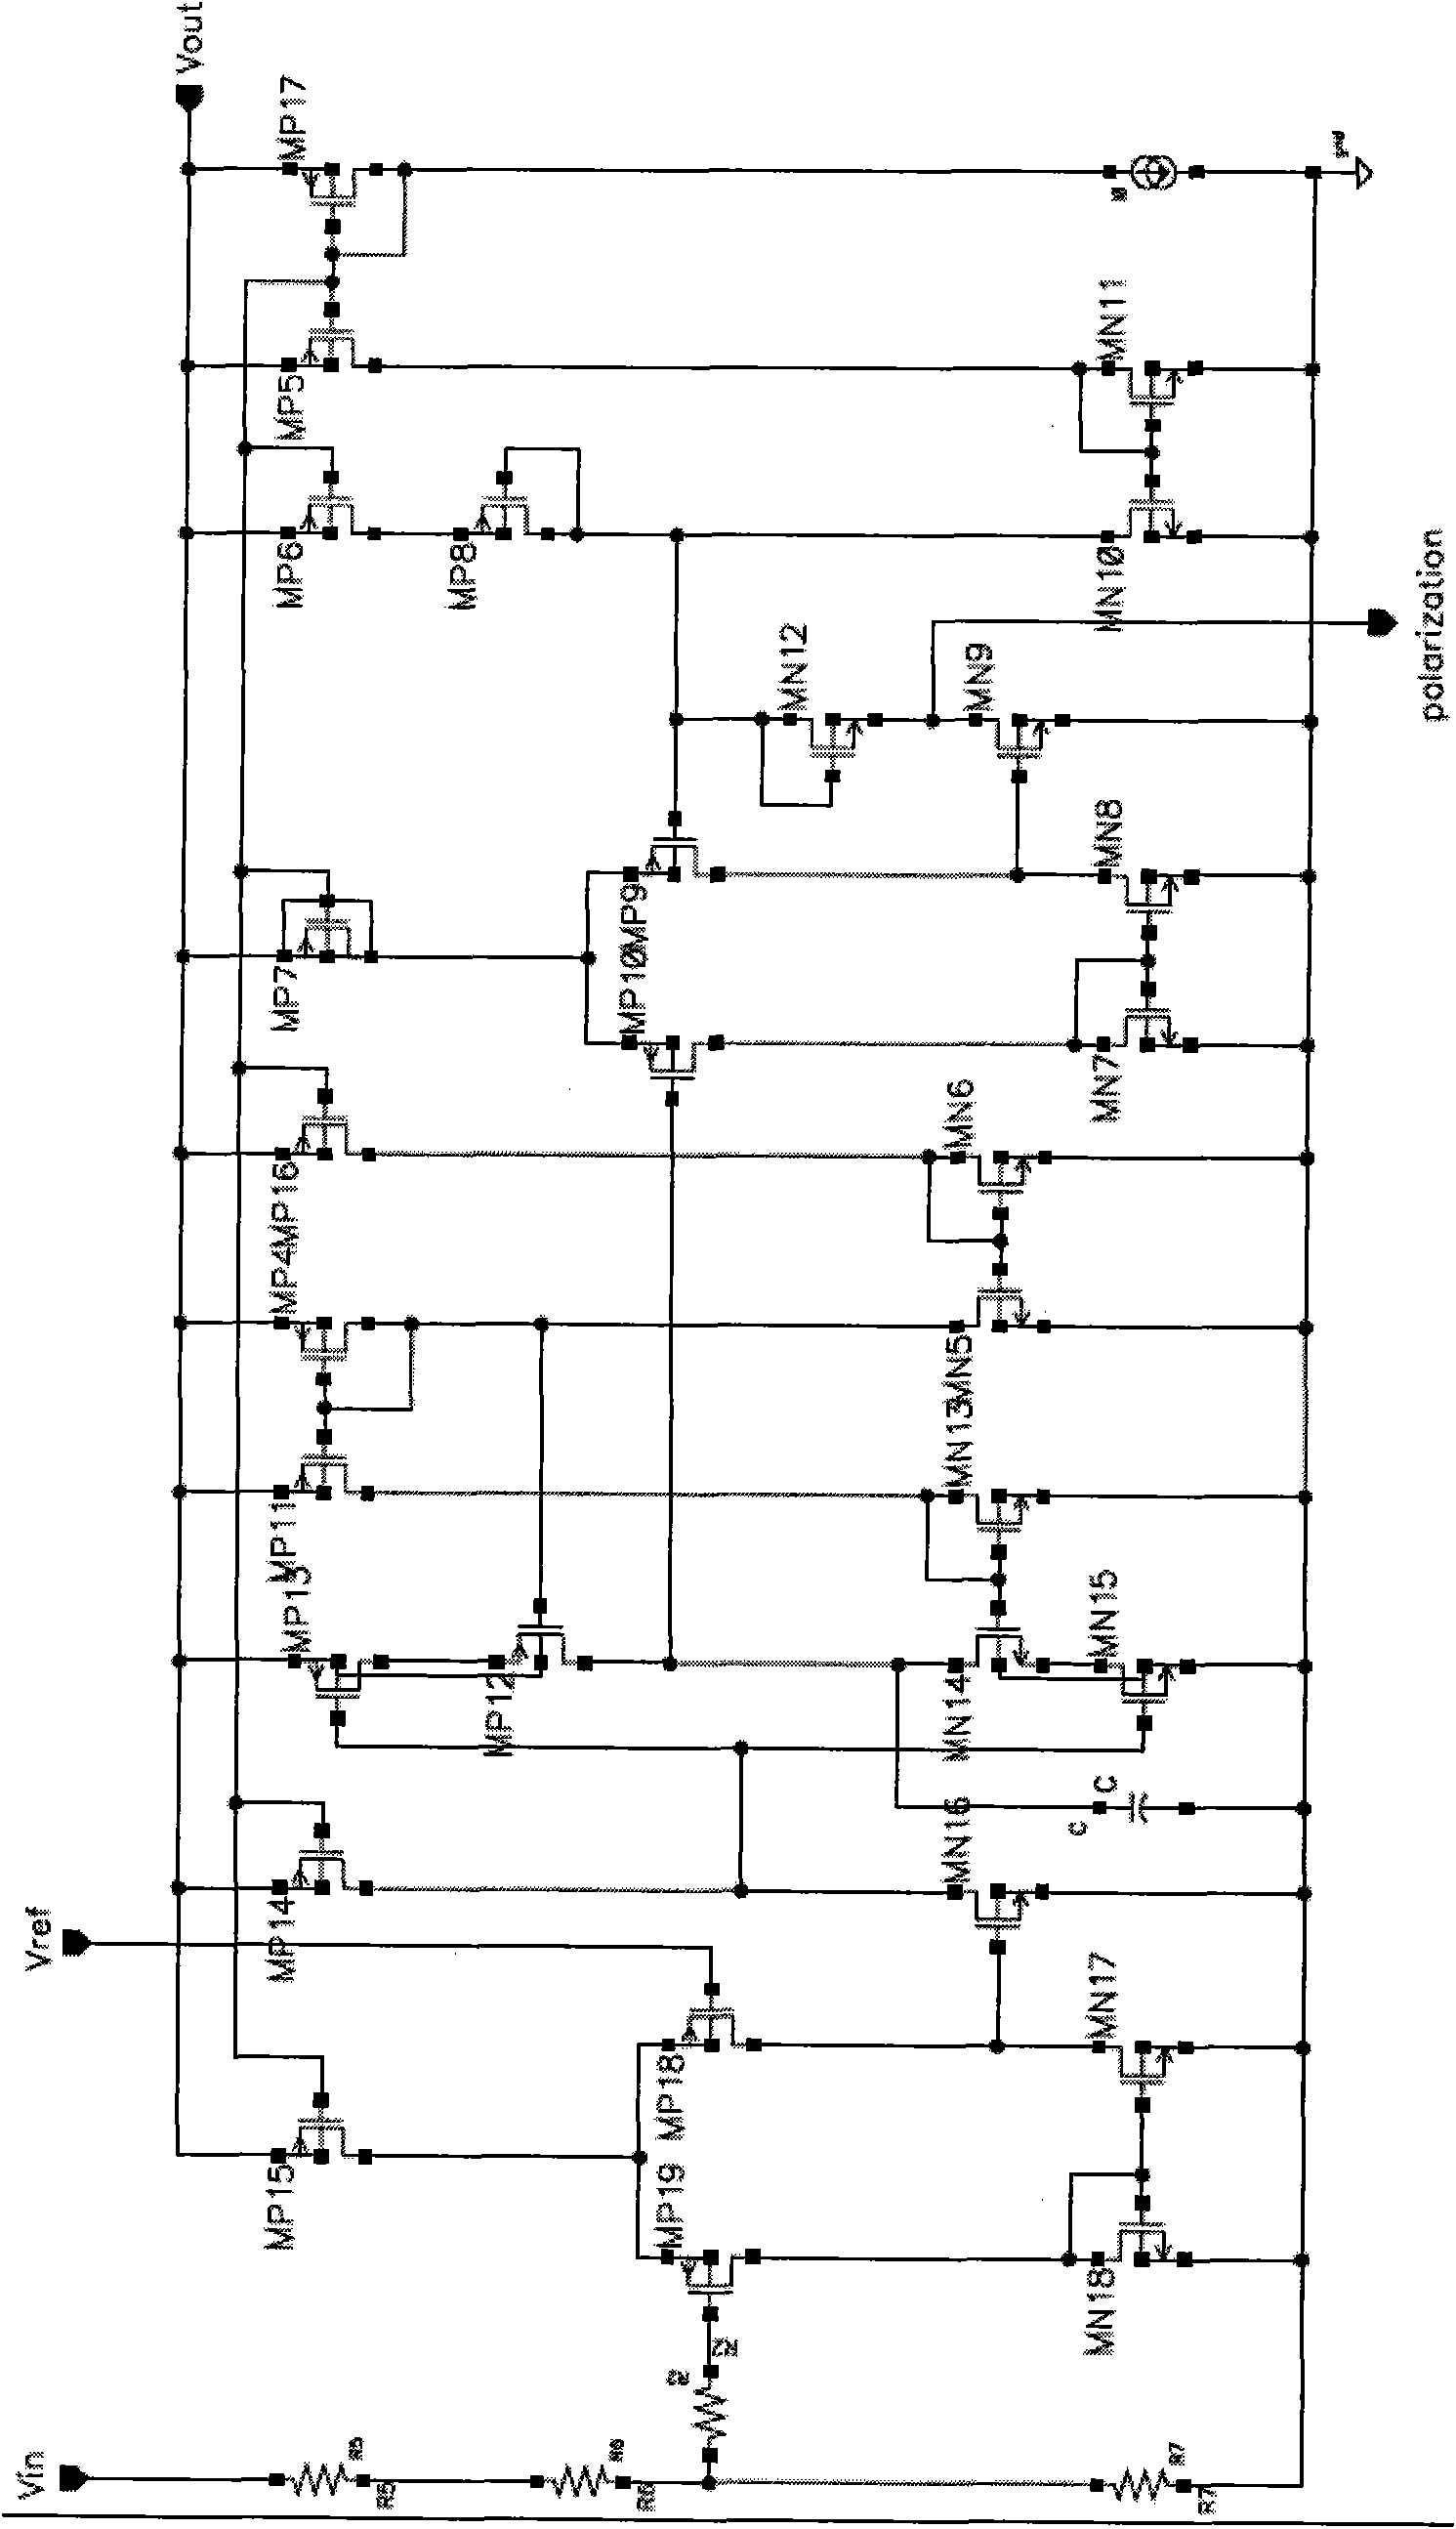 Single-chip control circuit of radiofrequency amplifying circuit of C and Ku wave bands of satellite television signals